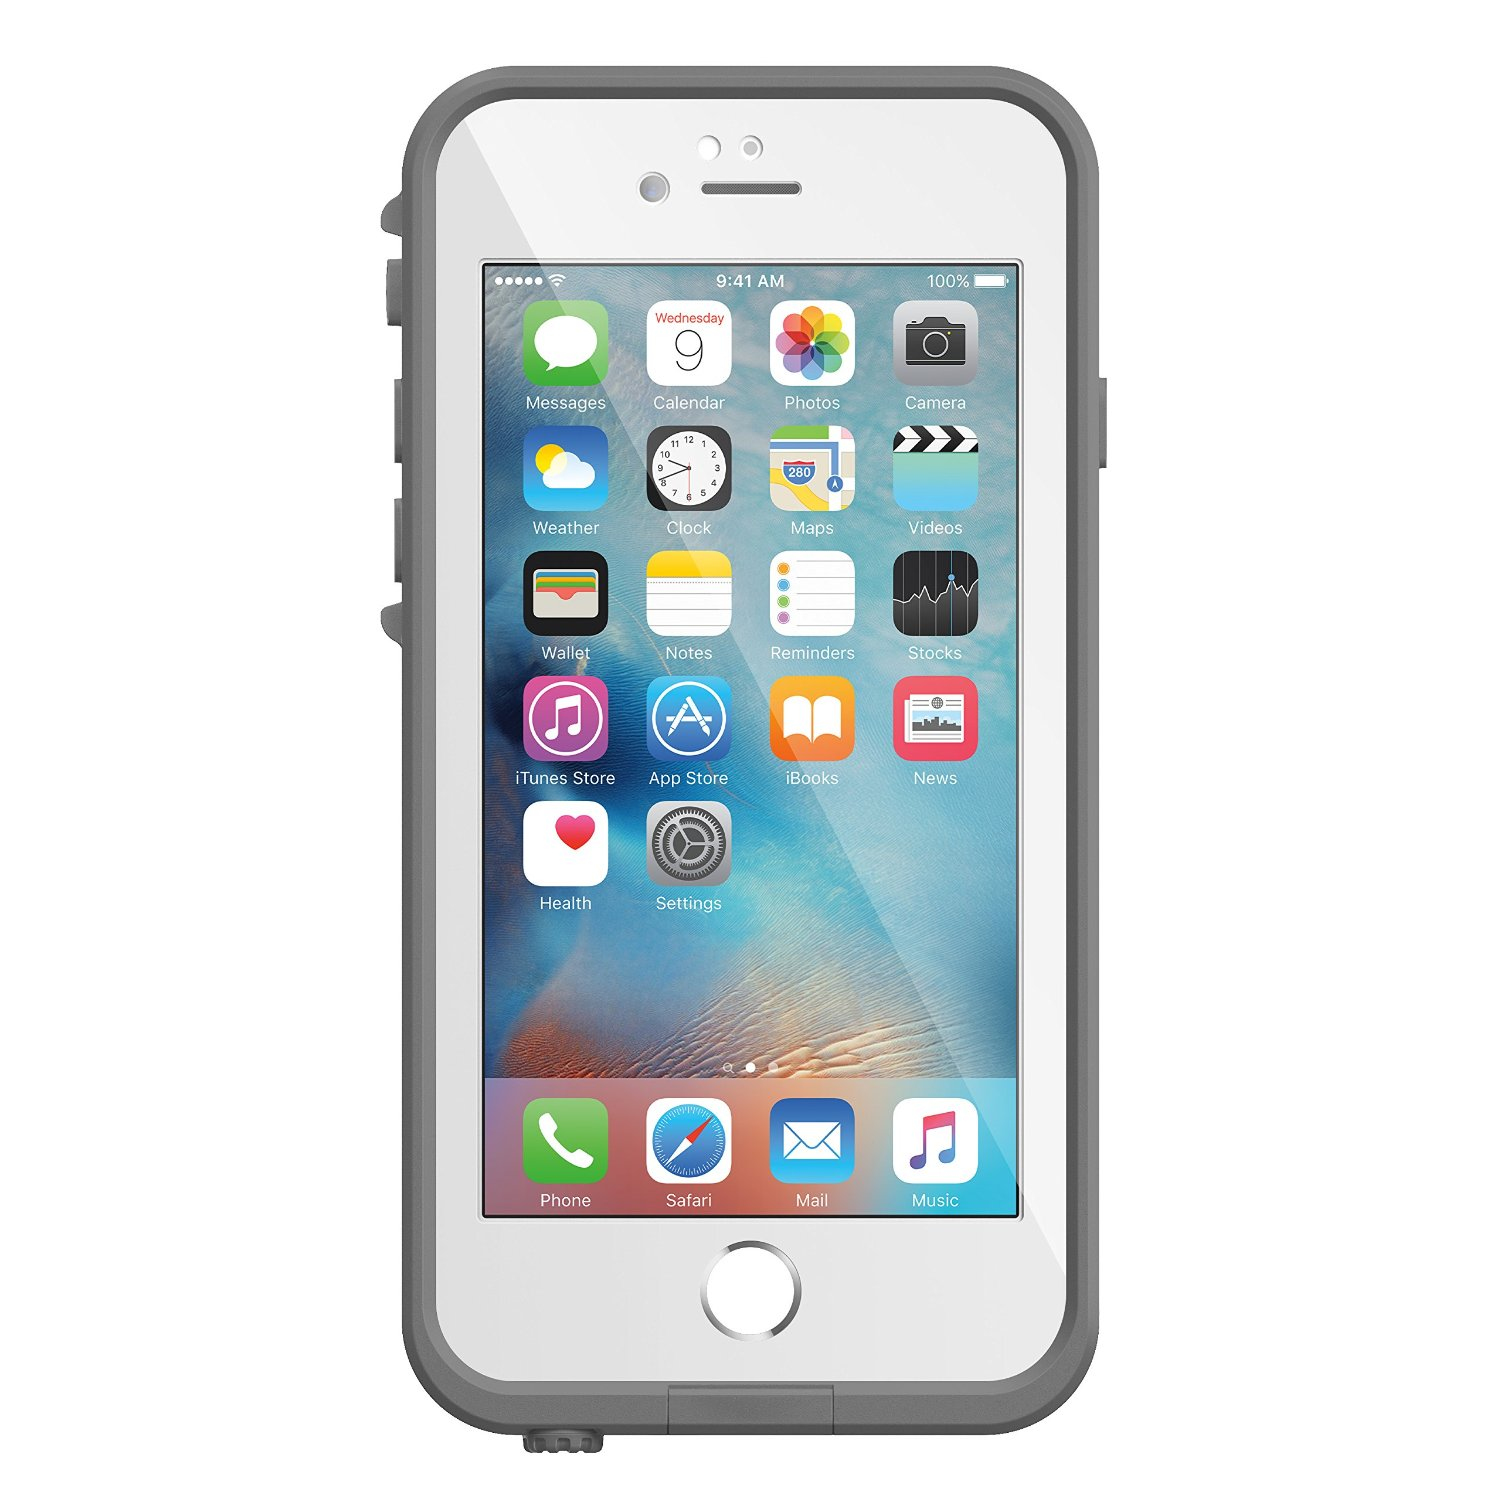 Lifeproof Fre Case Avalanche iPhone 6/6S